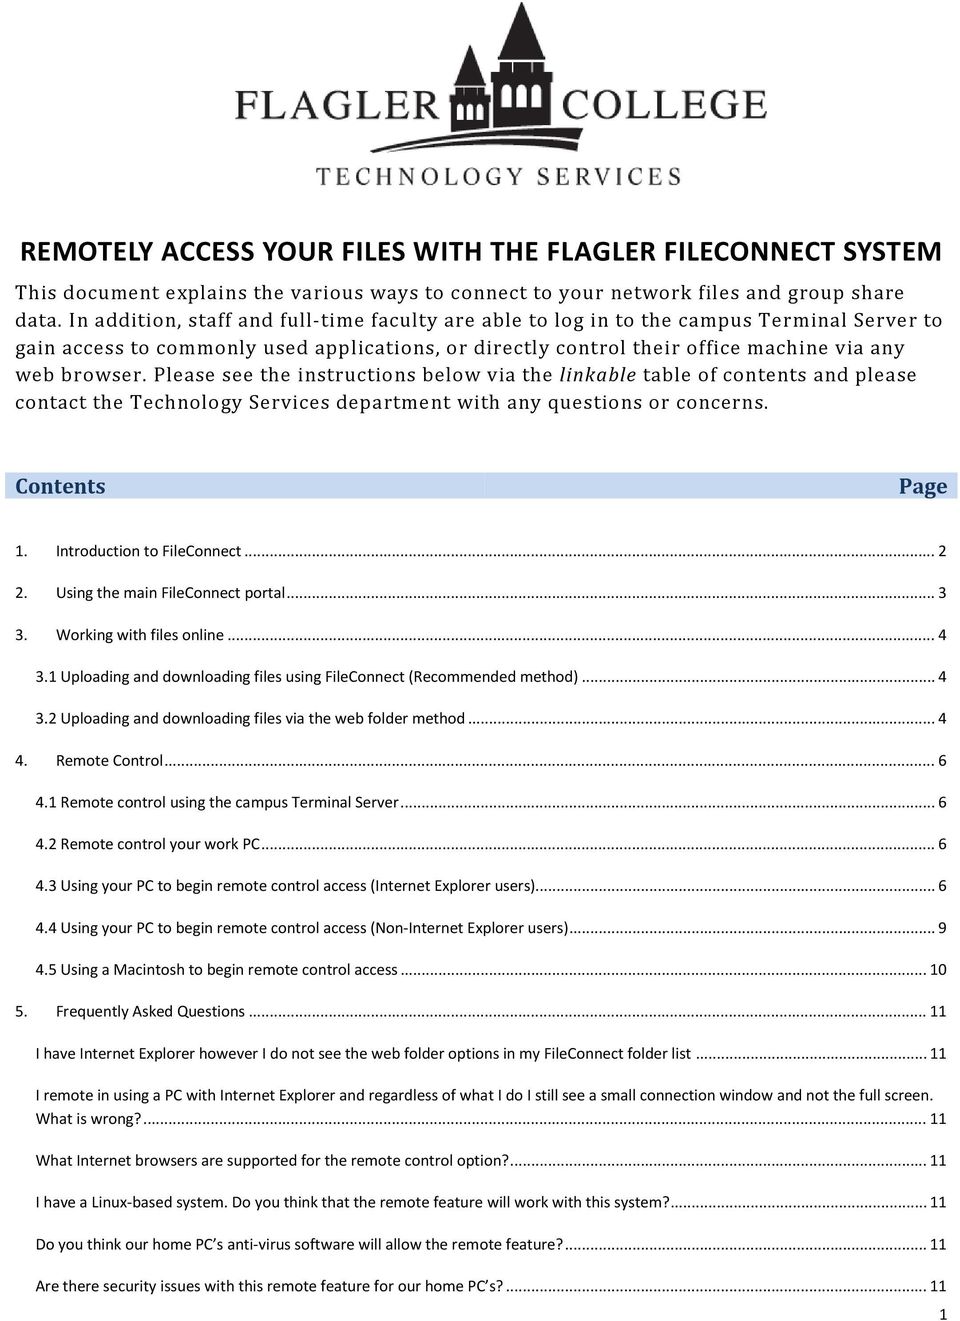 Please see the instructions below via the linkable table of contents and please contact the Technology Services department with any questions or concerns. Contents Page 1. Introduction to FileConnect.